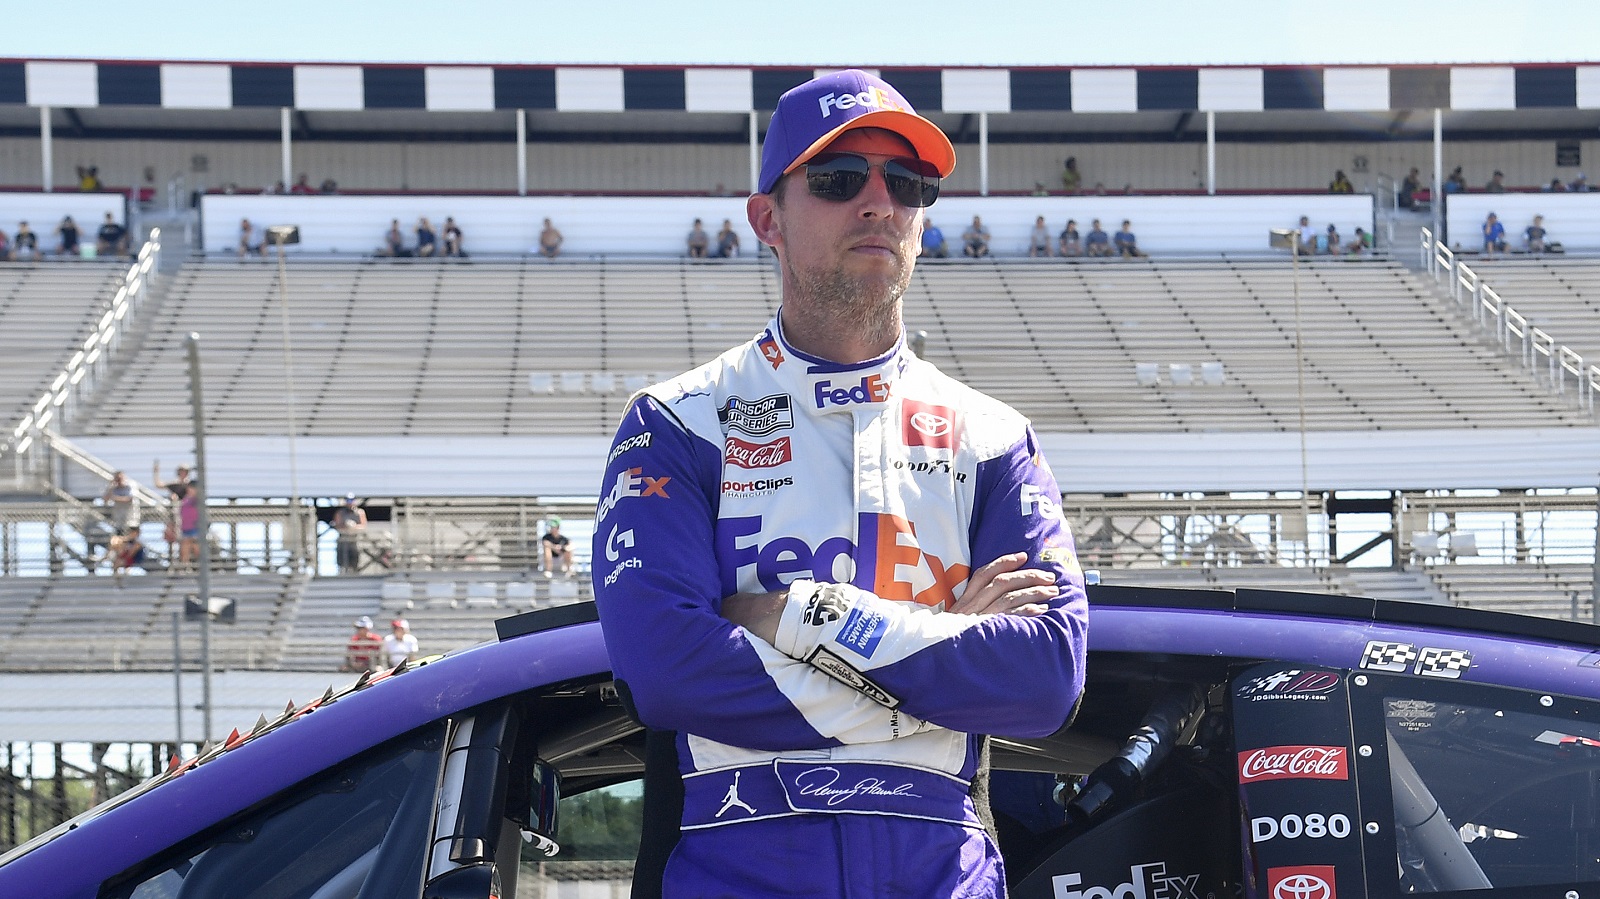 Denny Hamlin looks on during qualifying for the NASCAR Cup Series M&M's Fan Appreciation 400 at Pocono Raceway on July 23, 2022. | Logan Riely/Getty Images